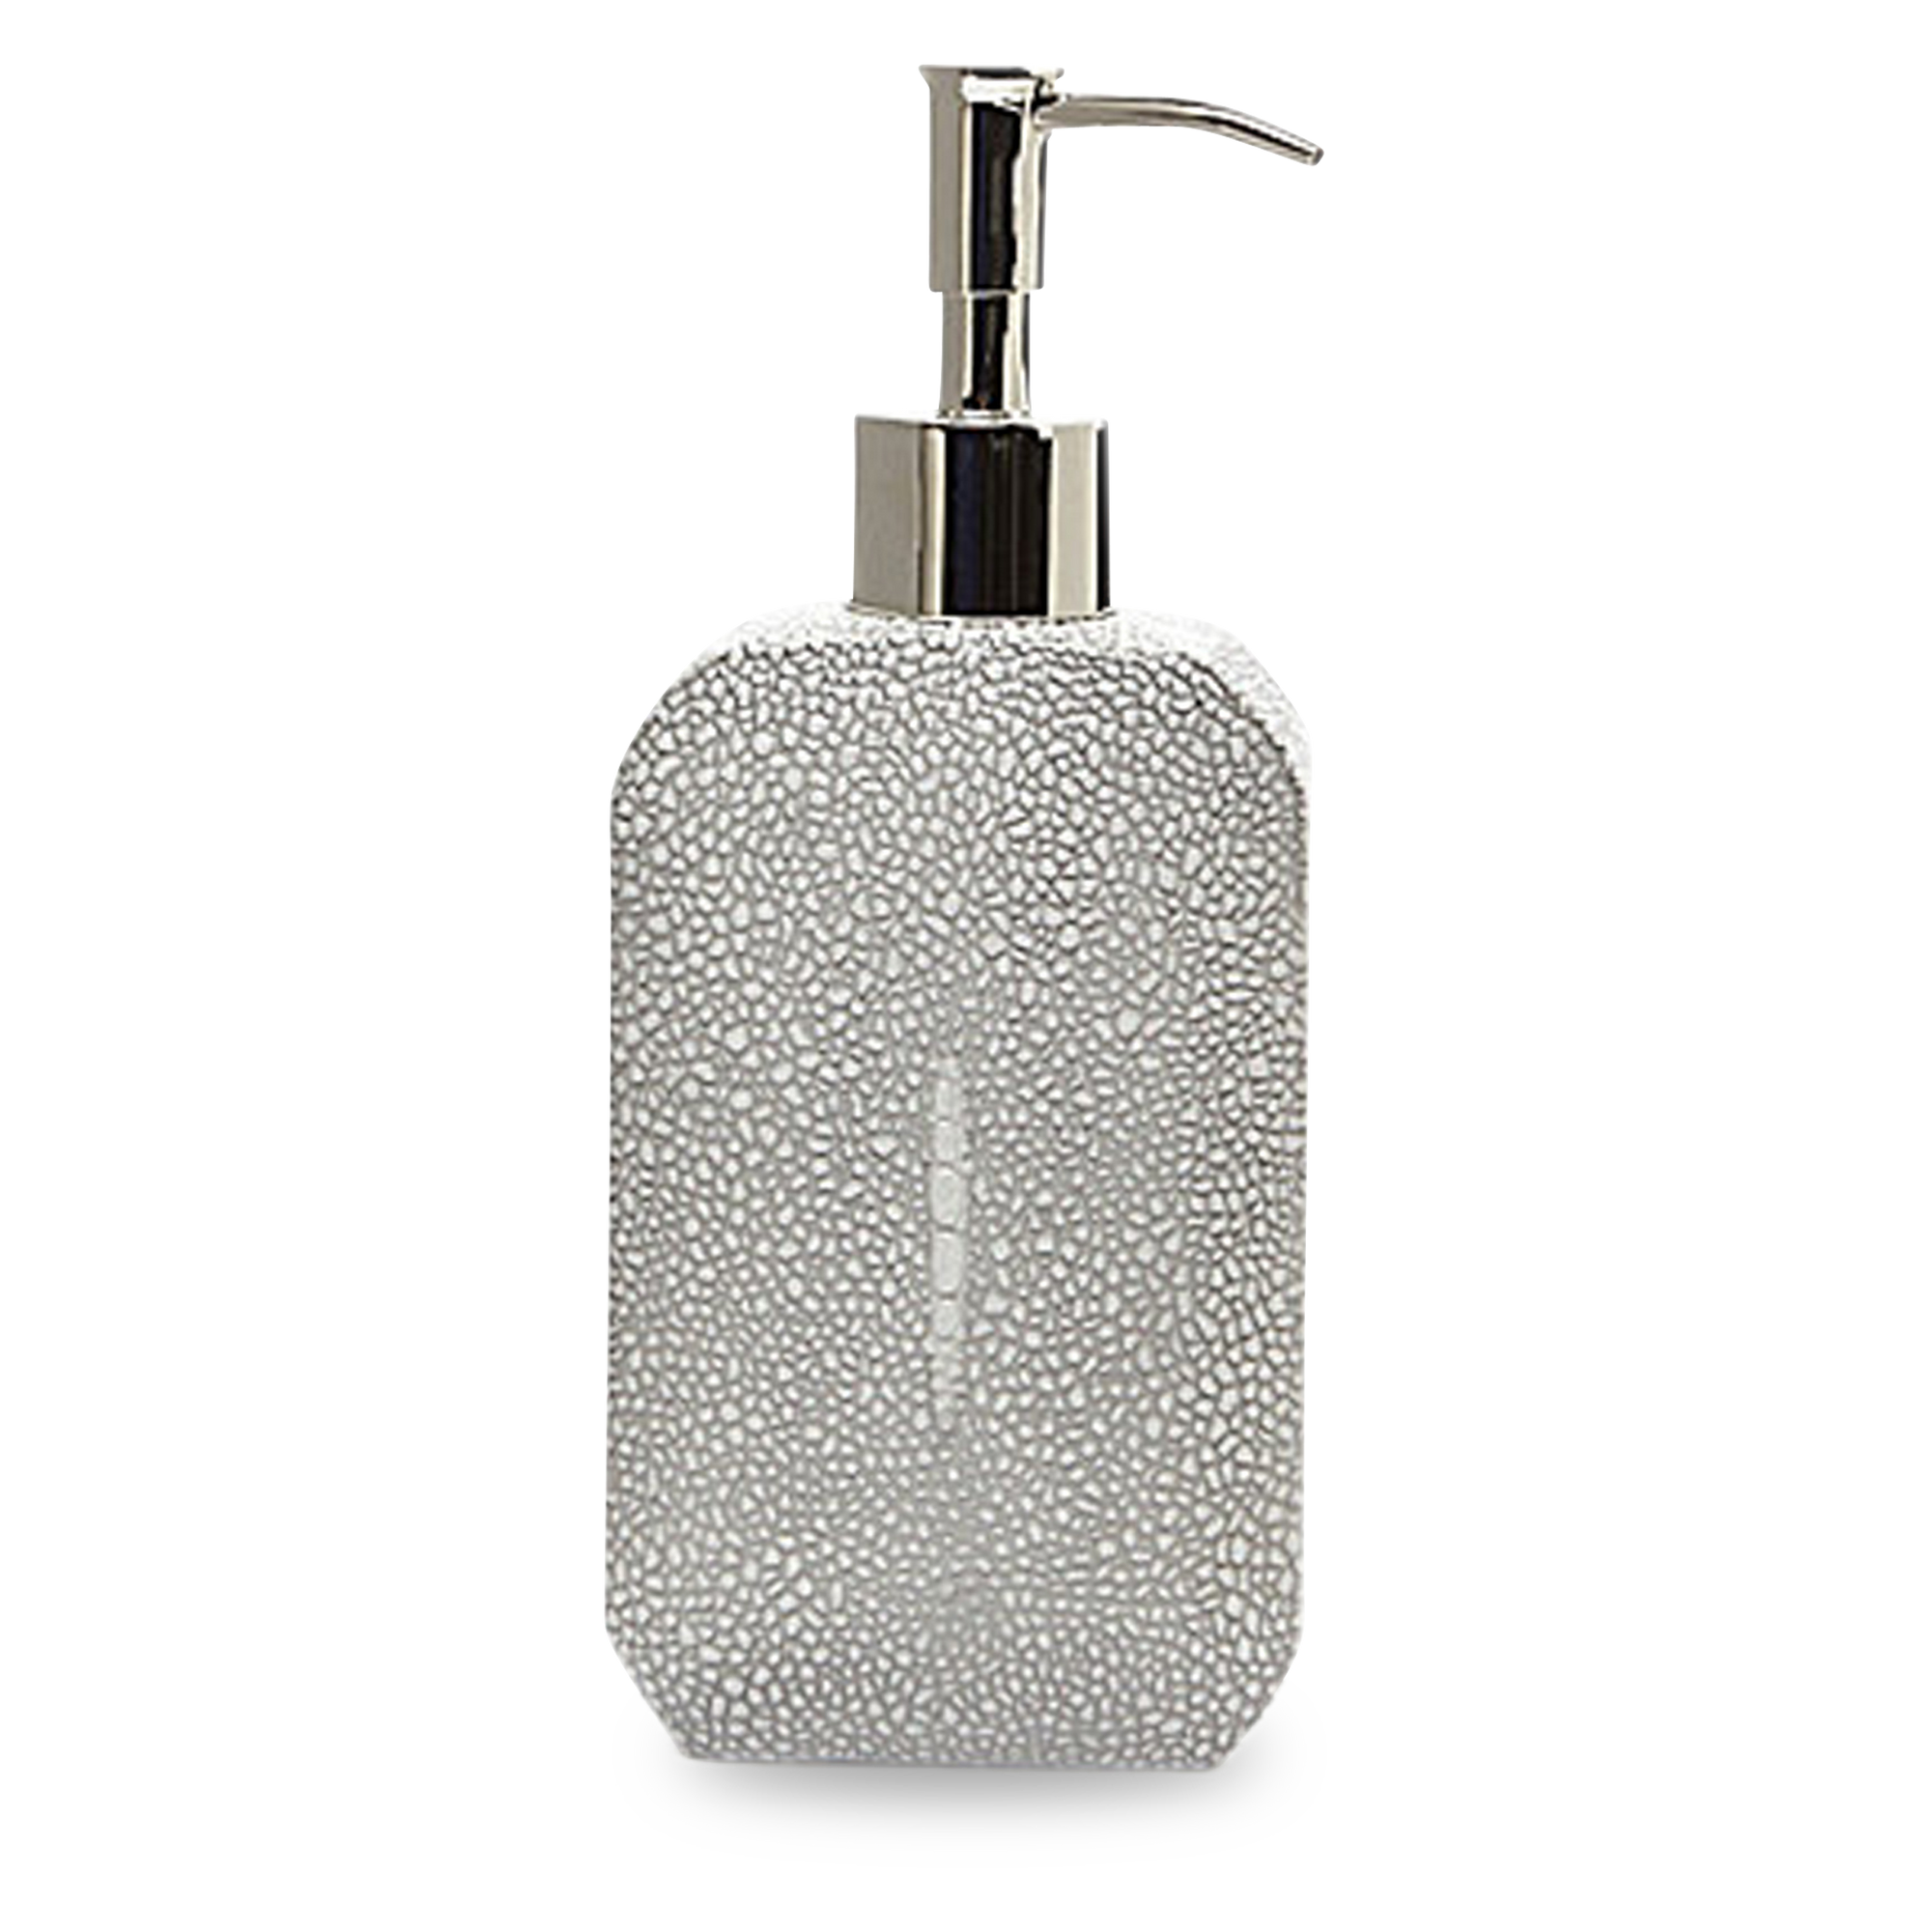 Bring a touch of the exotic to the bath with the Shagreen Collection.